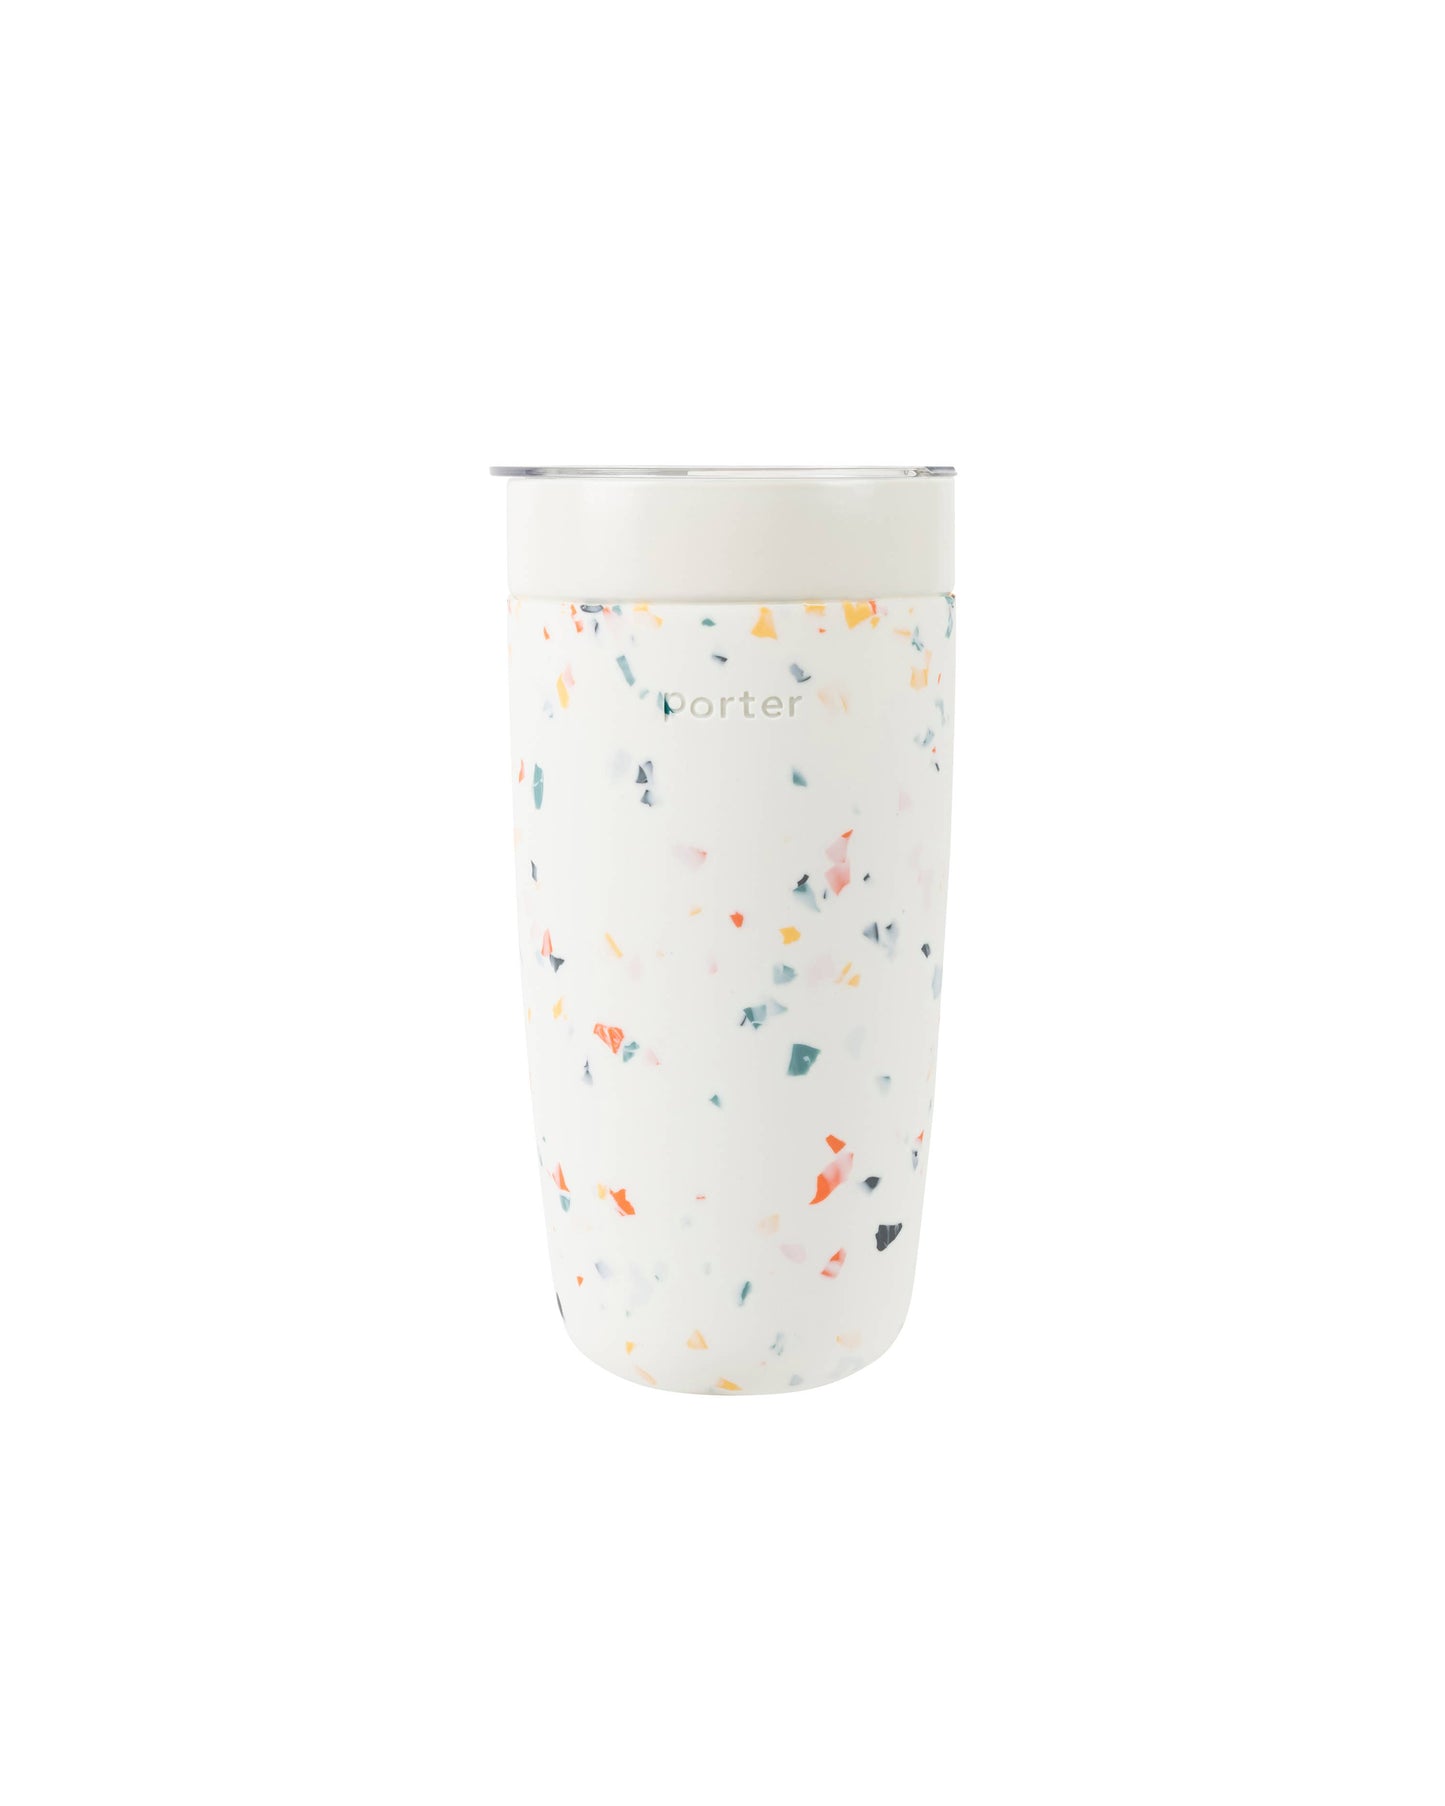 Porter - Insulated Ceramic Stainless Steel Coffee Tumbler - Terrazzo  W&P Terrazzo Cream  -better made easy-eco-friendly-sustainable-gifting